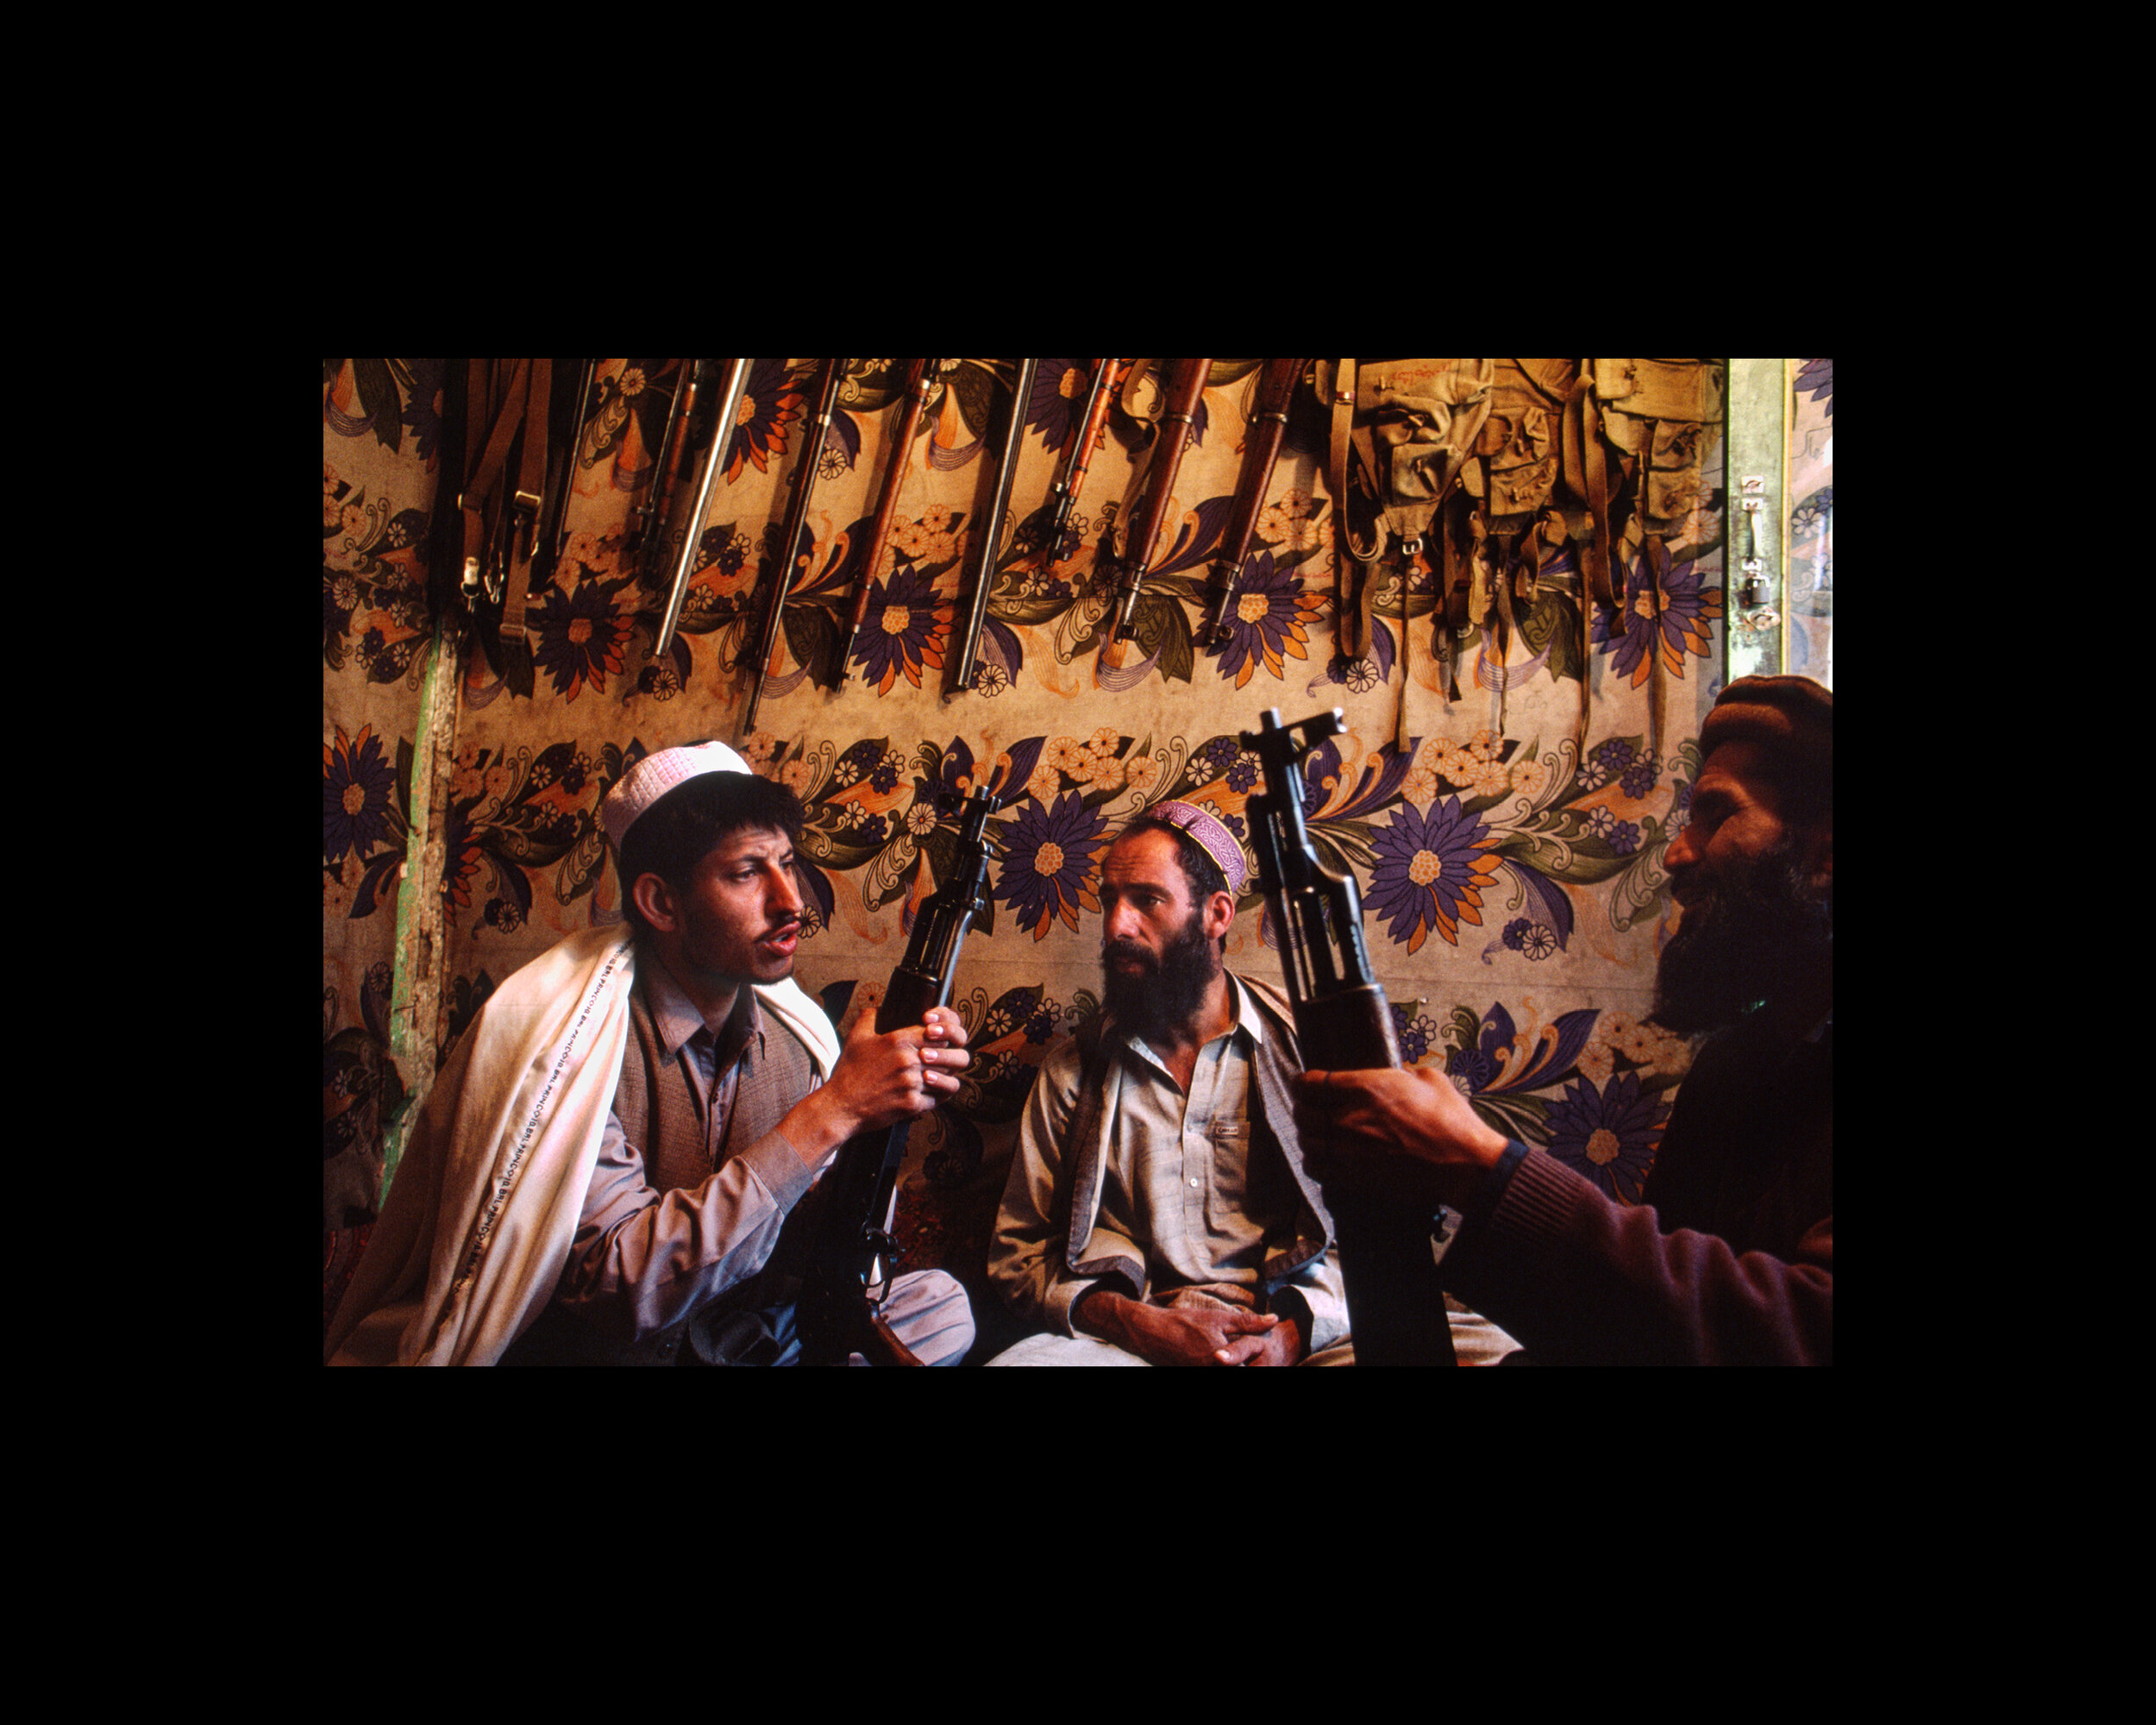  Pathans inspect homemade Kalishnakovs (AK-47) in a gun shop in Landi Kotal, a town on the border with Afghanistan in the tribal Northwest Frontier Province. Pakistan. 1998 